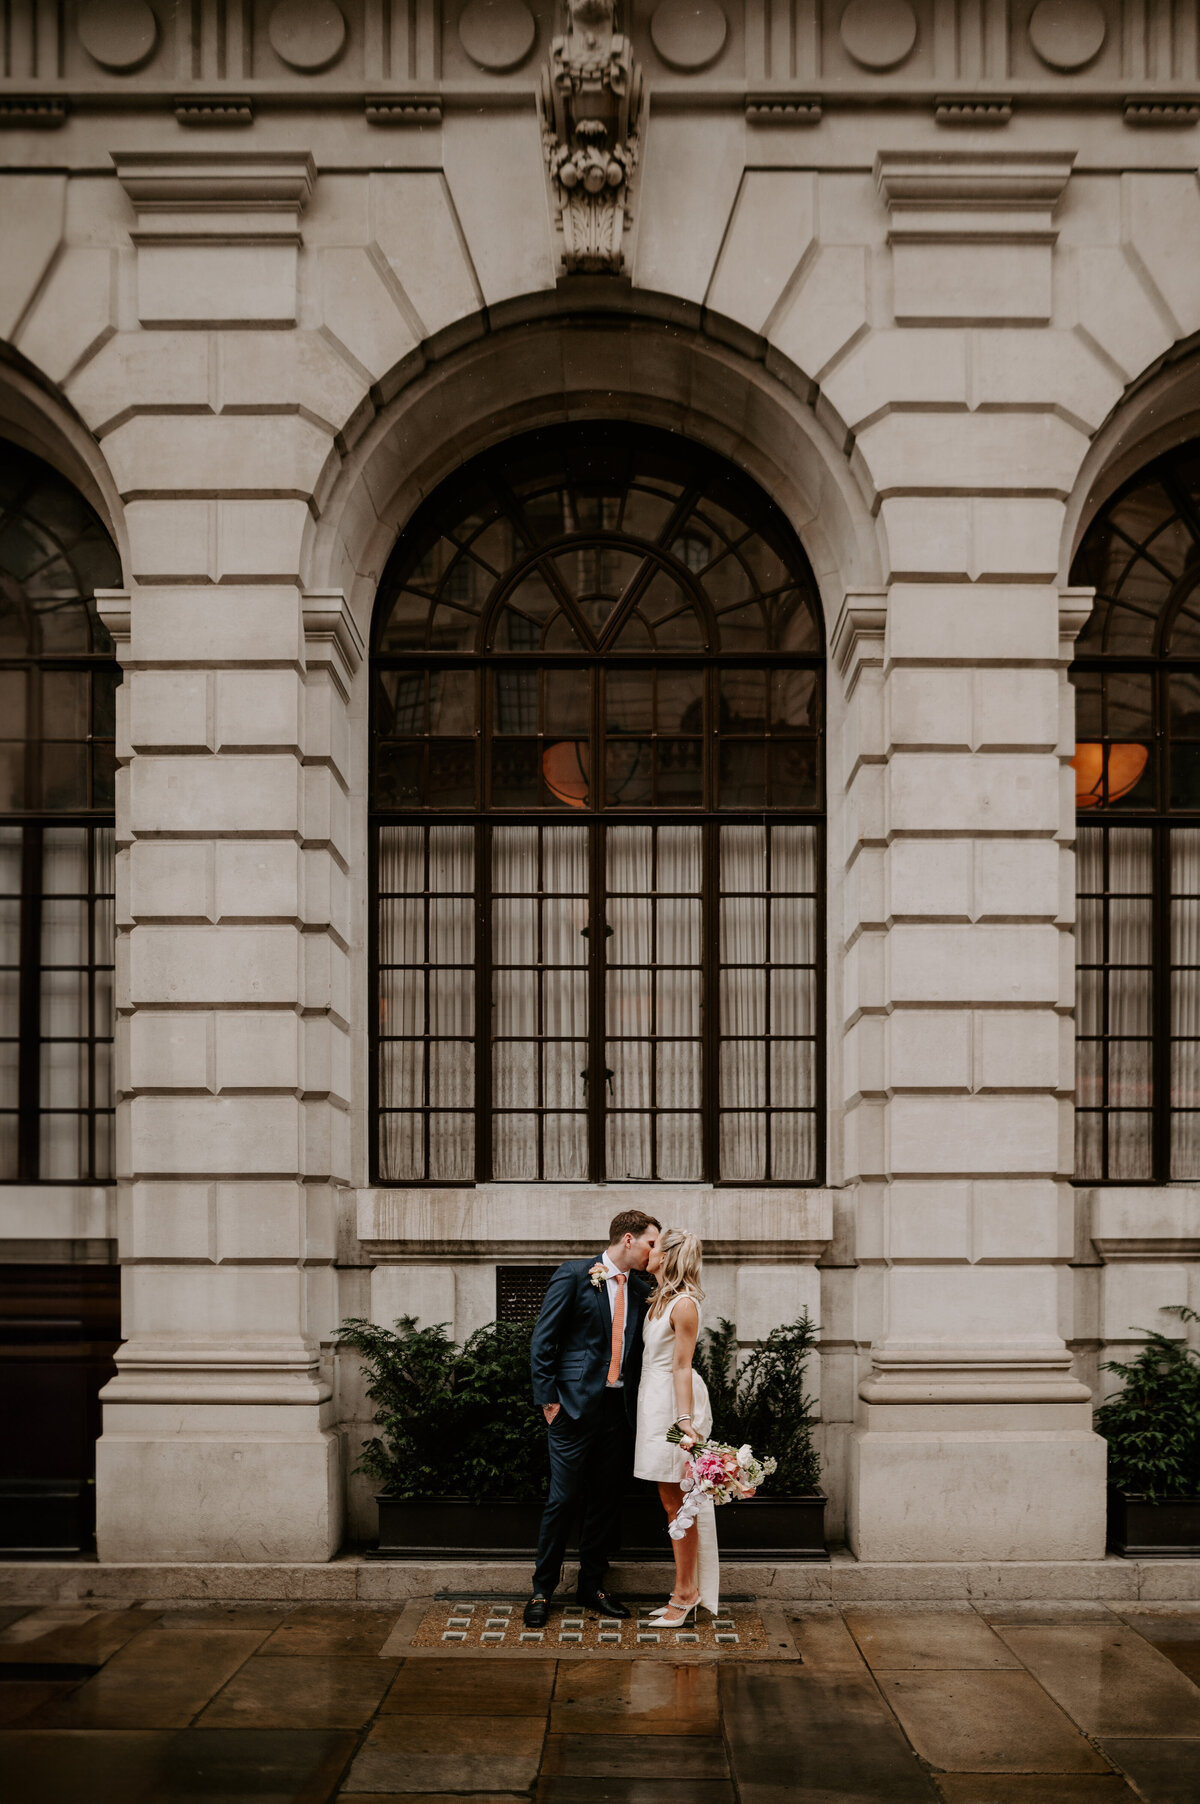 A wedding couple kiss outside The Ned in London. The Bride is wearing a short wedding dress and the groom is wearing a skinny fit navy suit.